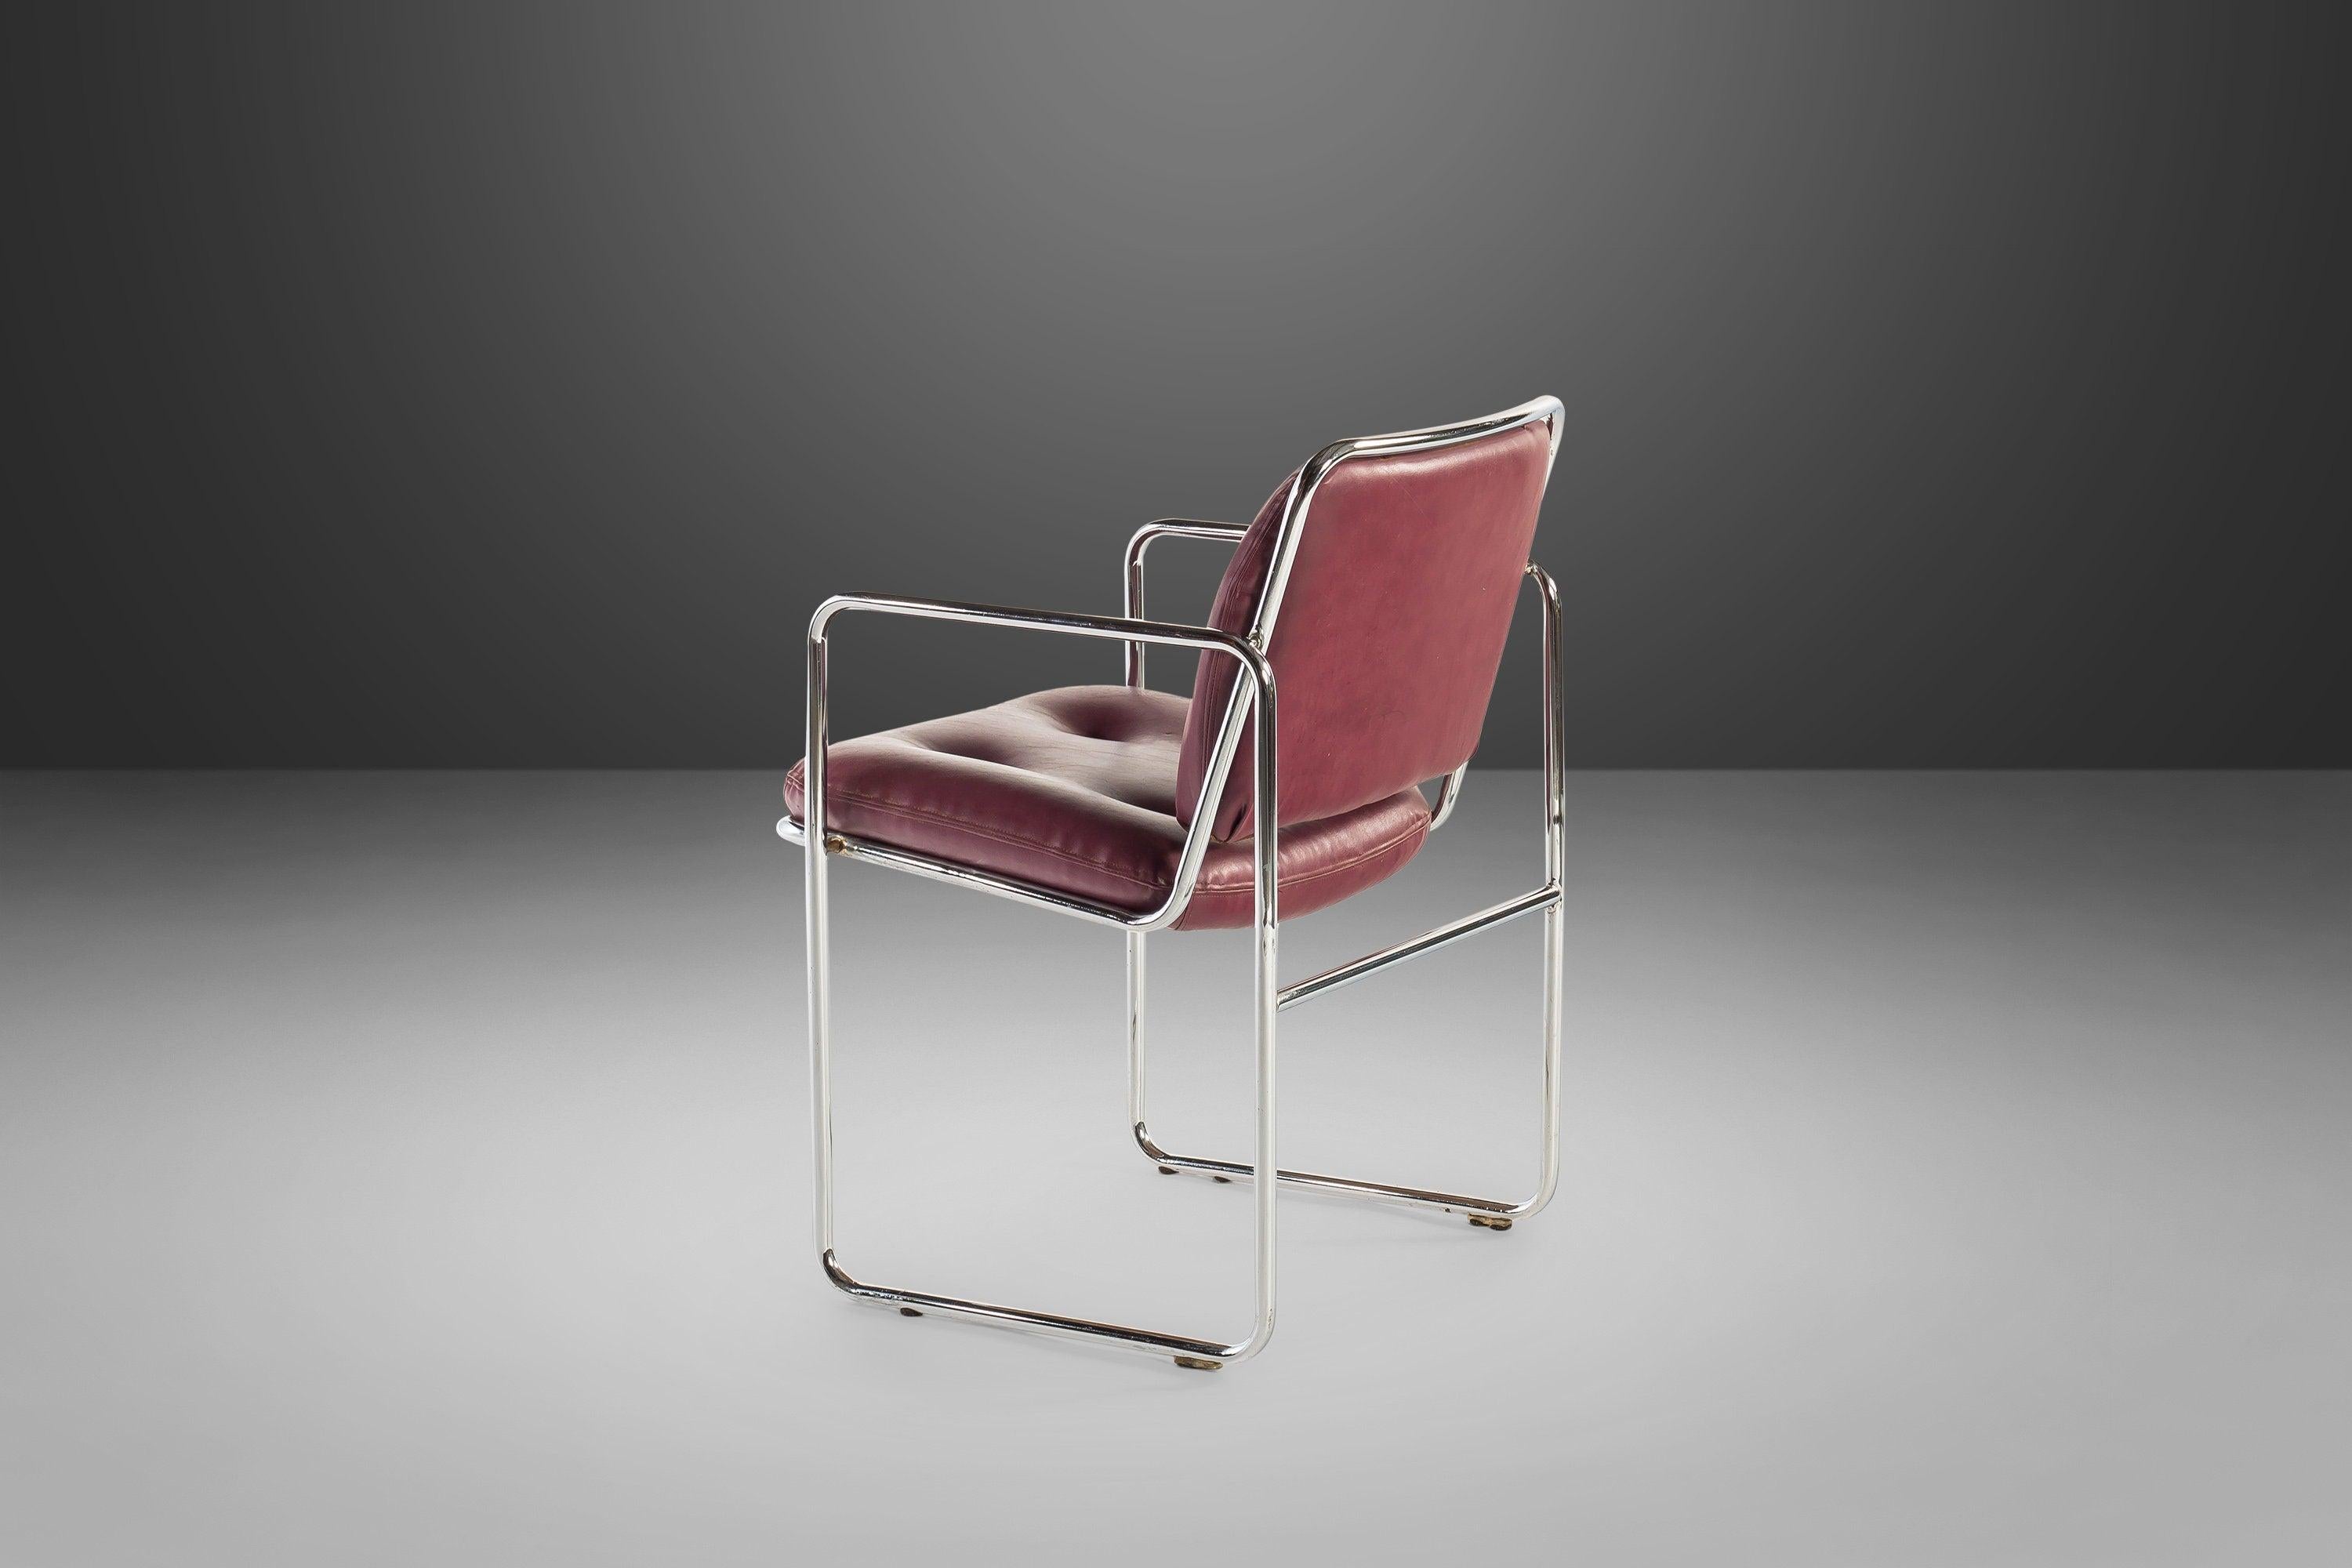 Mid-Century Modern MCM Tubular Chrome Lounge Chairs by Chromcraft with Rich Oxblood Seats, c. 1960s For Sale